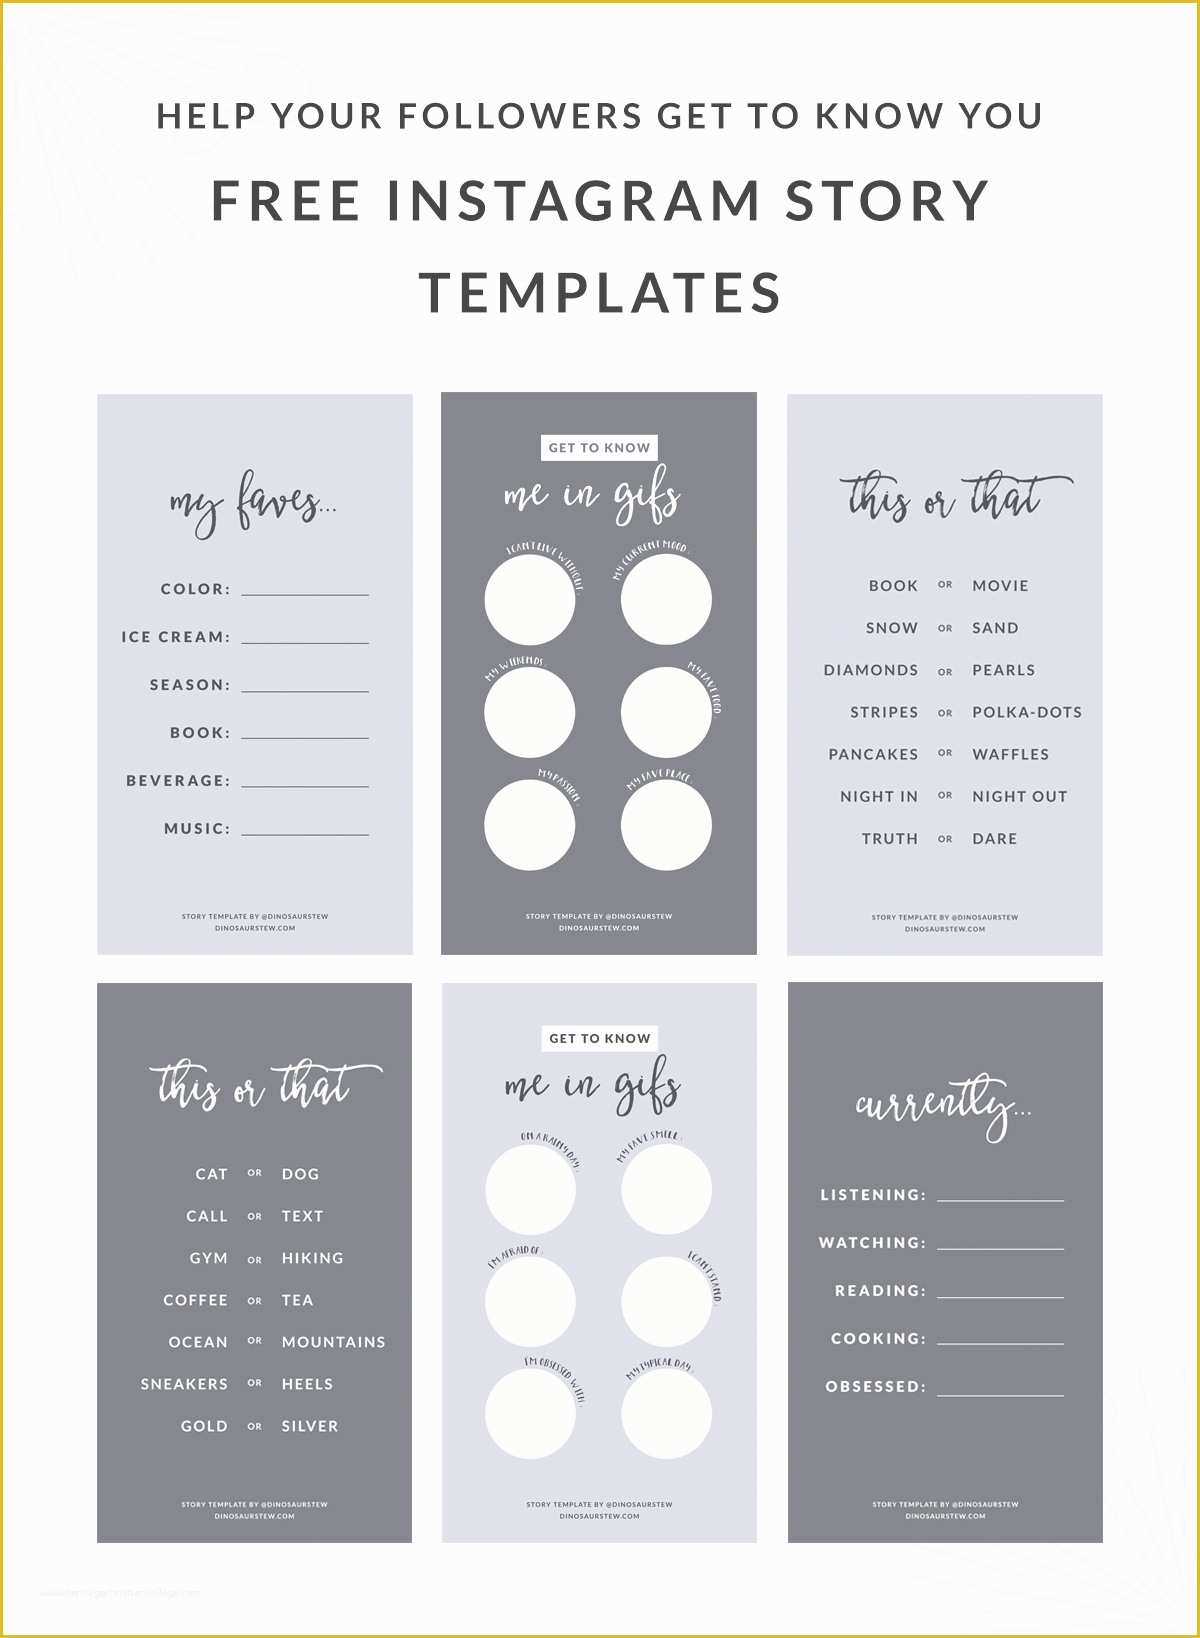 Free Instagram Templates Of Free Instagram Story Templates Help Your Followers Get